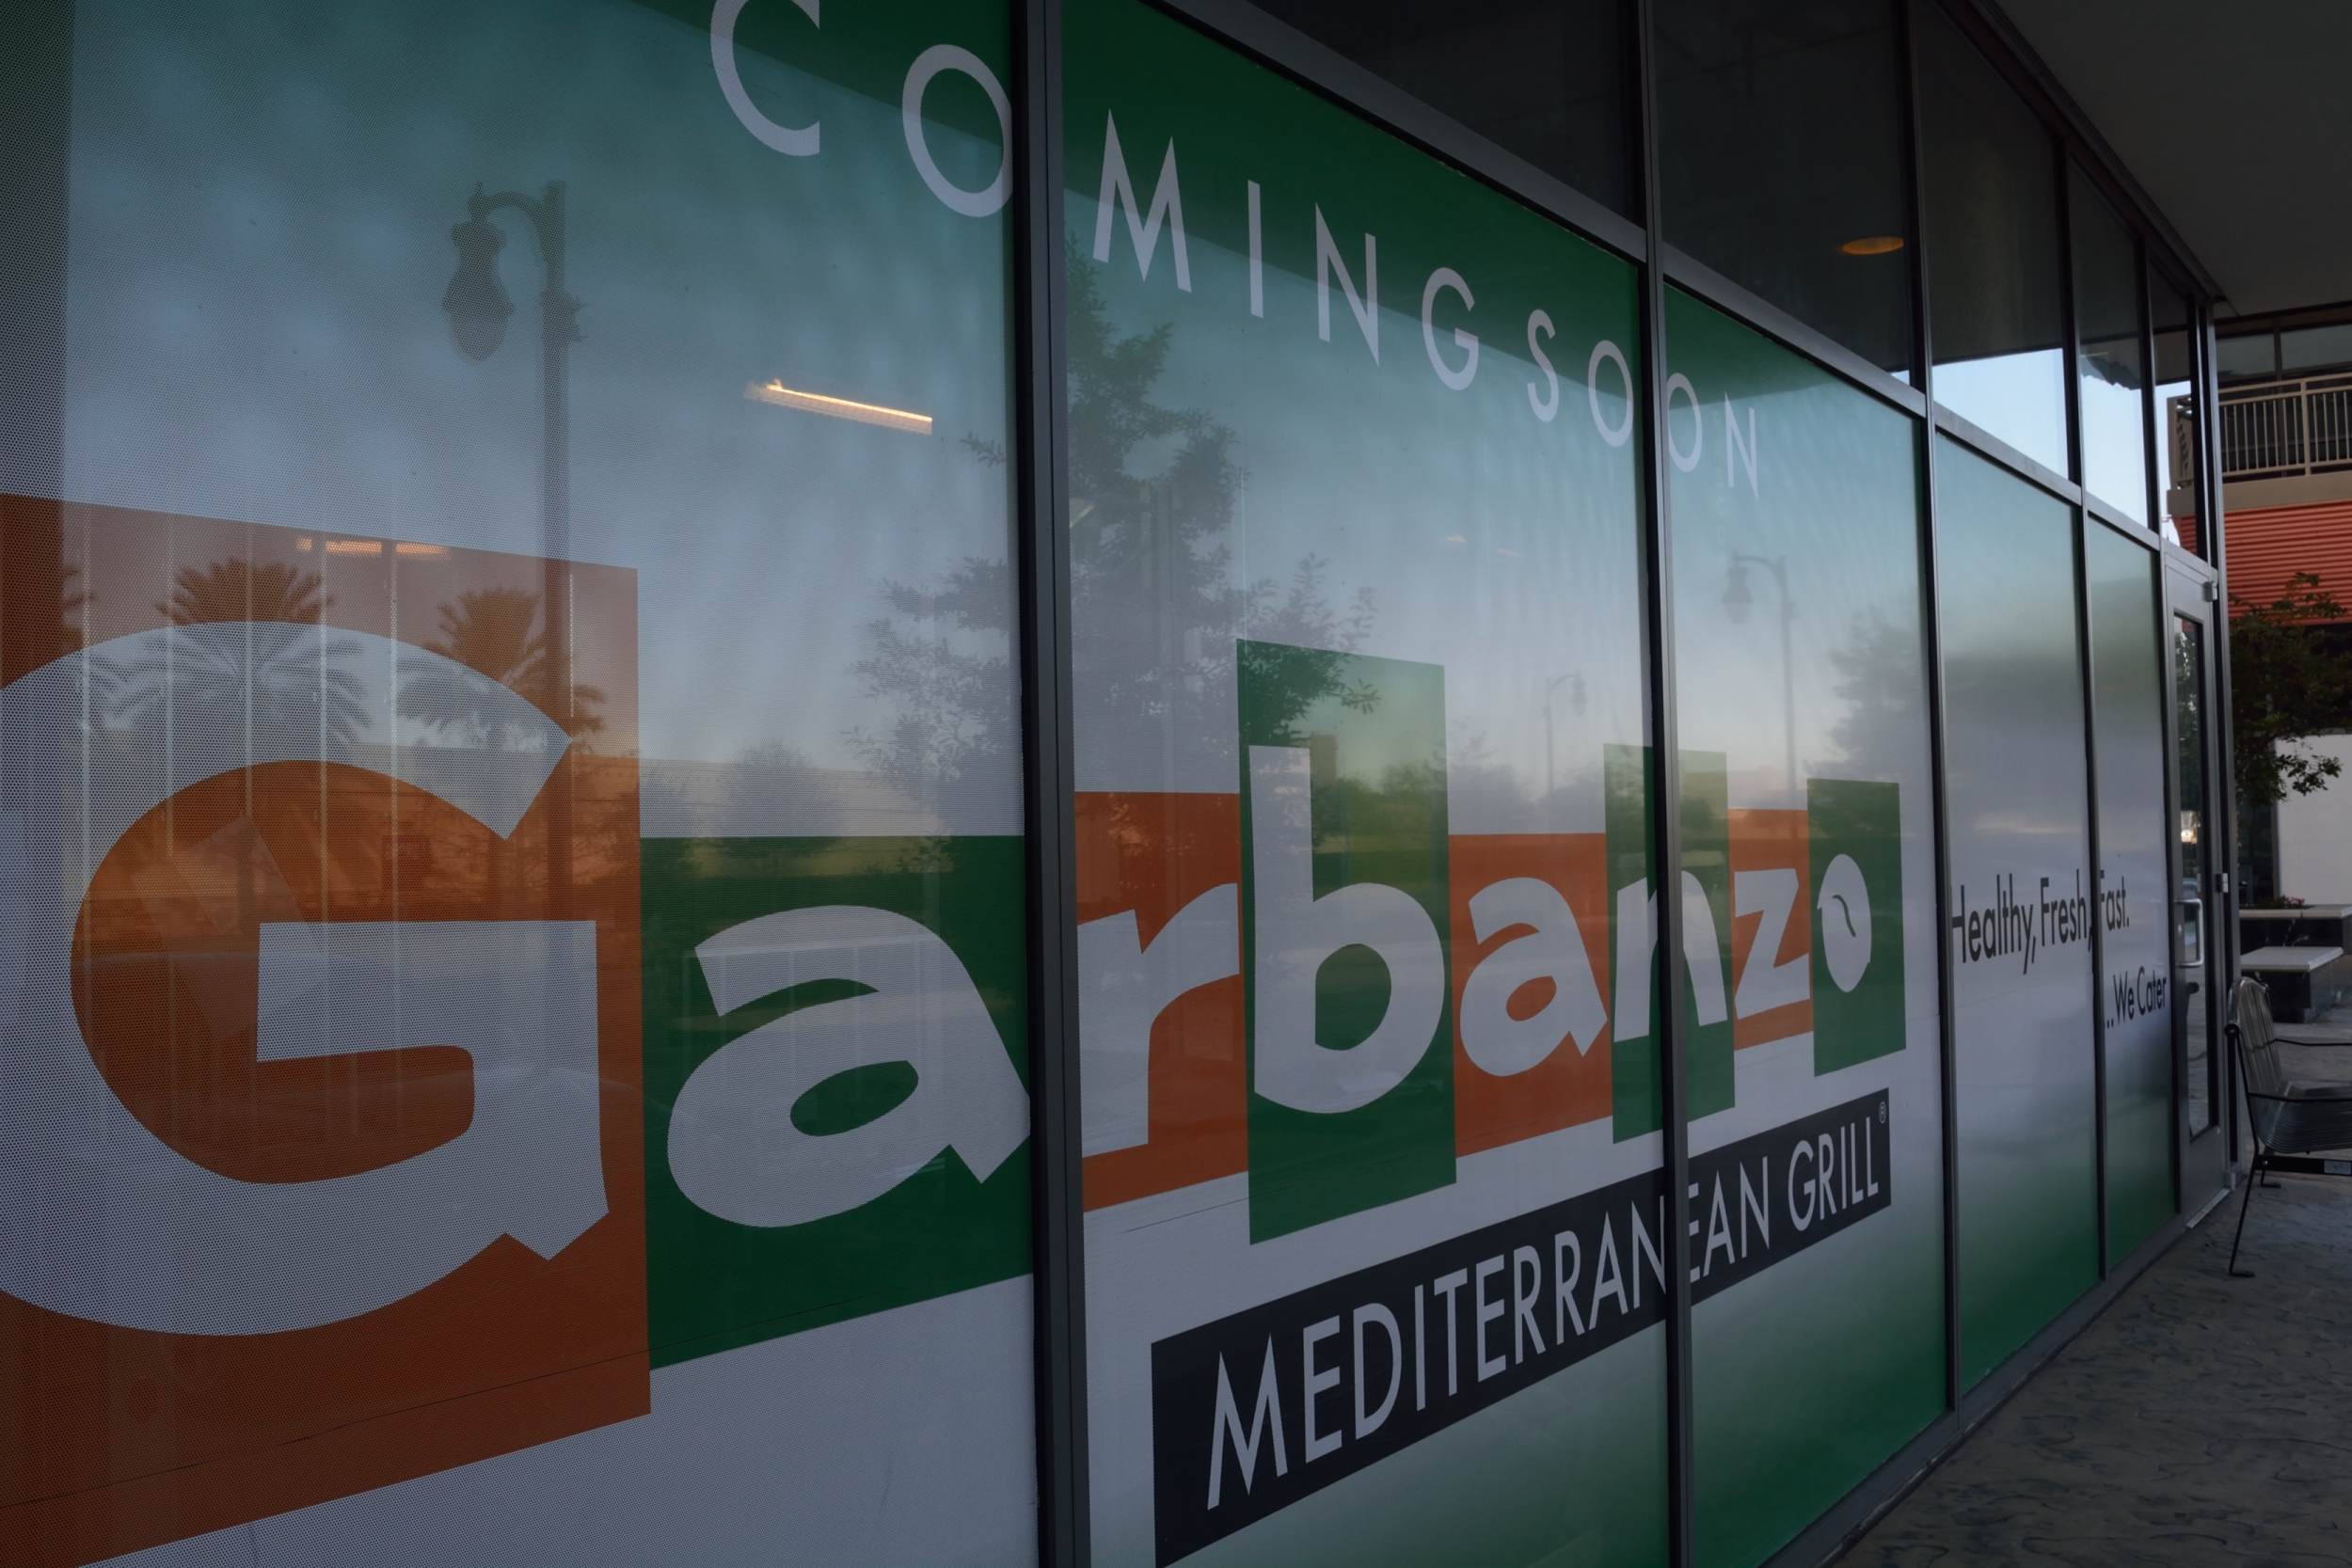 Garbanzo Mediterranean Grill is opening its first Houston location soon.